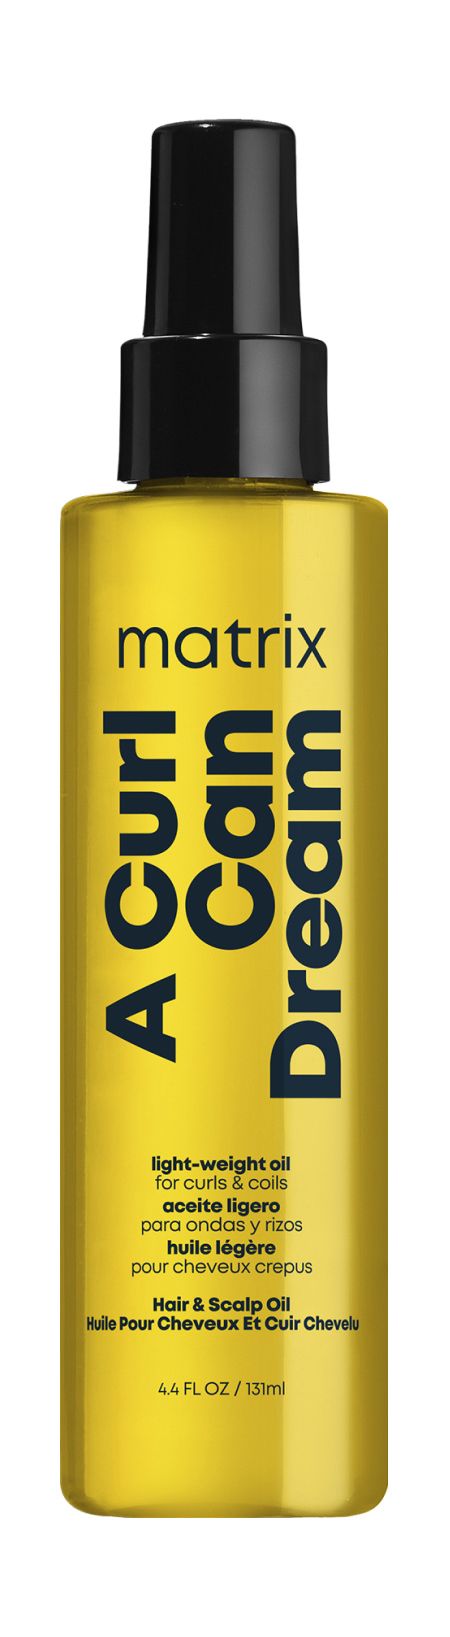 A curl can dream. Матрикс a Curl can Dream. Matrix Curl can Dream масло. Matrix a Curl can Dream отзывы. Matrix a Curl can Dream обзор.